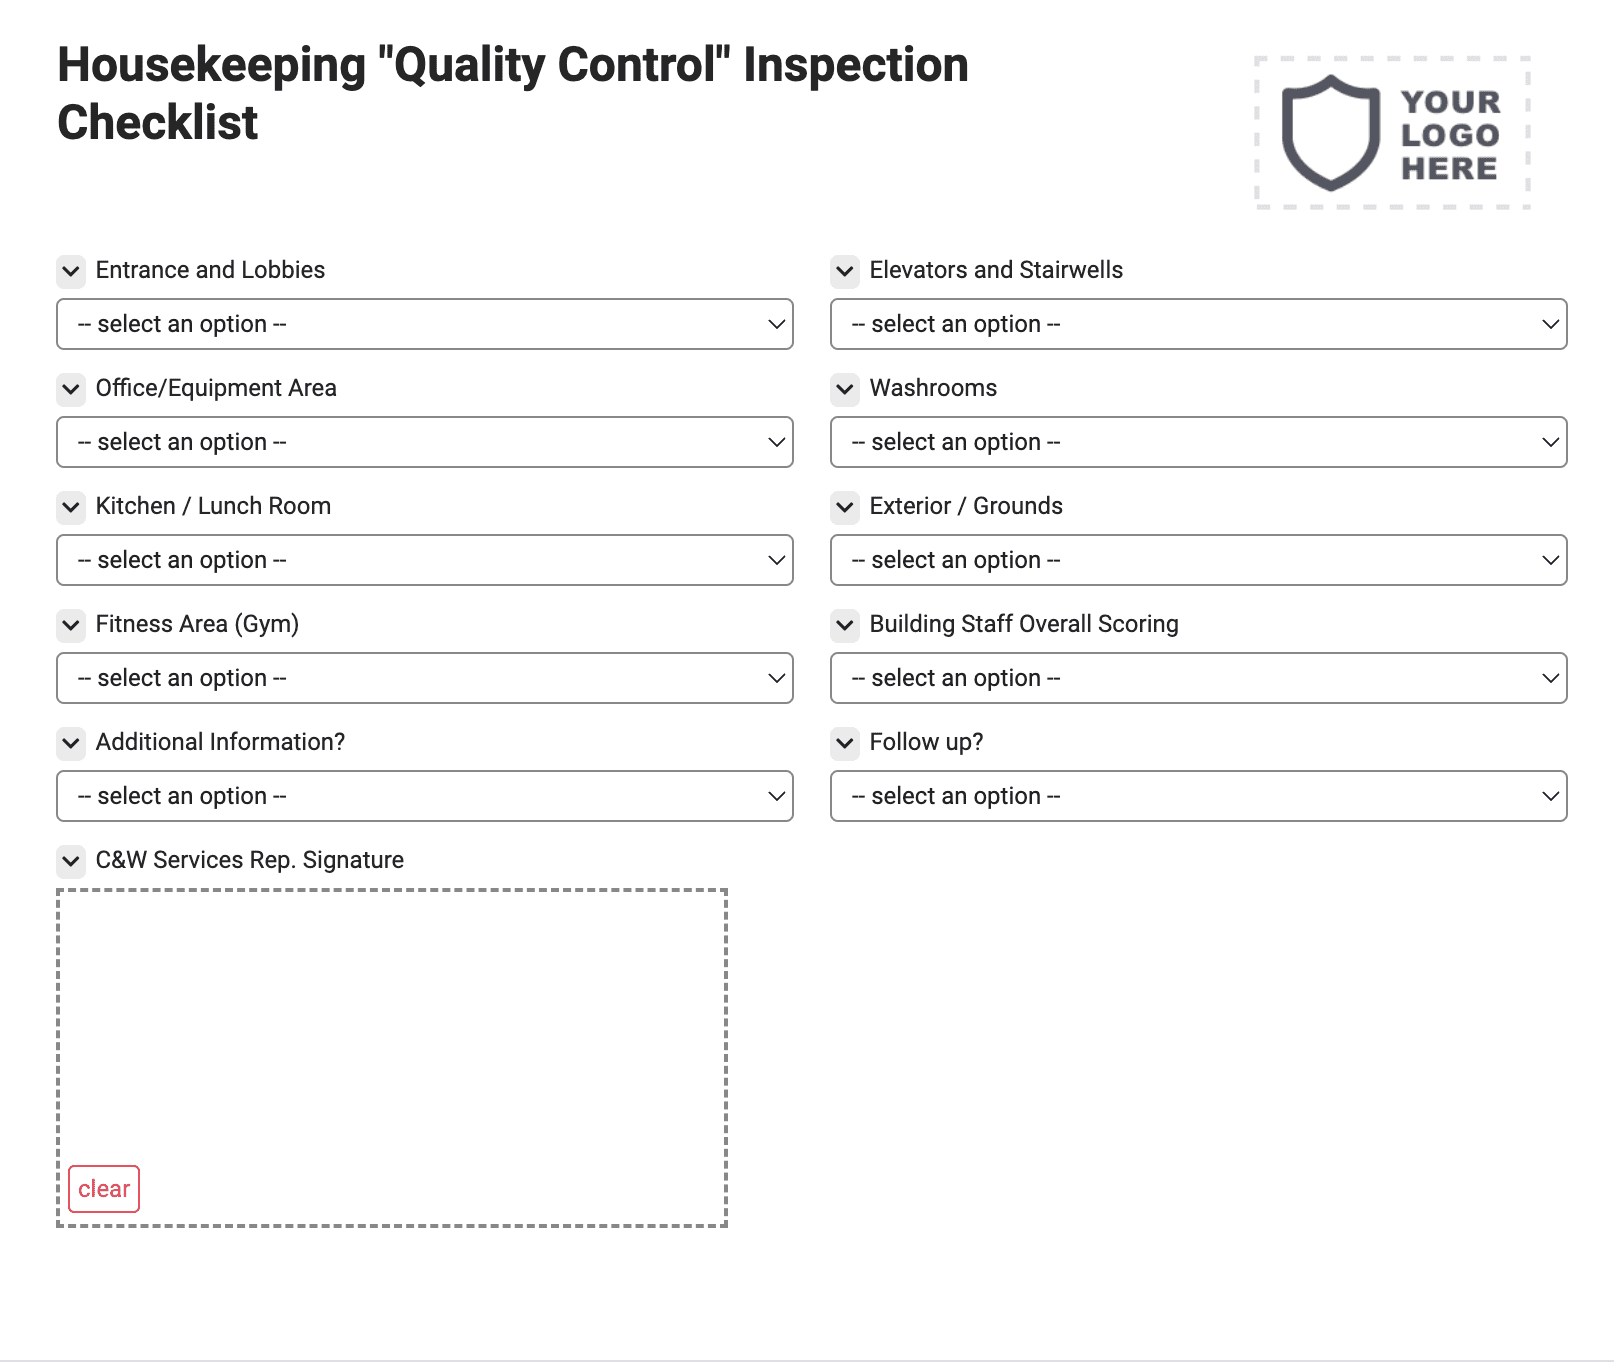 Housekeeping "Quality Control" Inspection Checklist